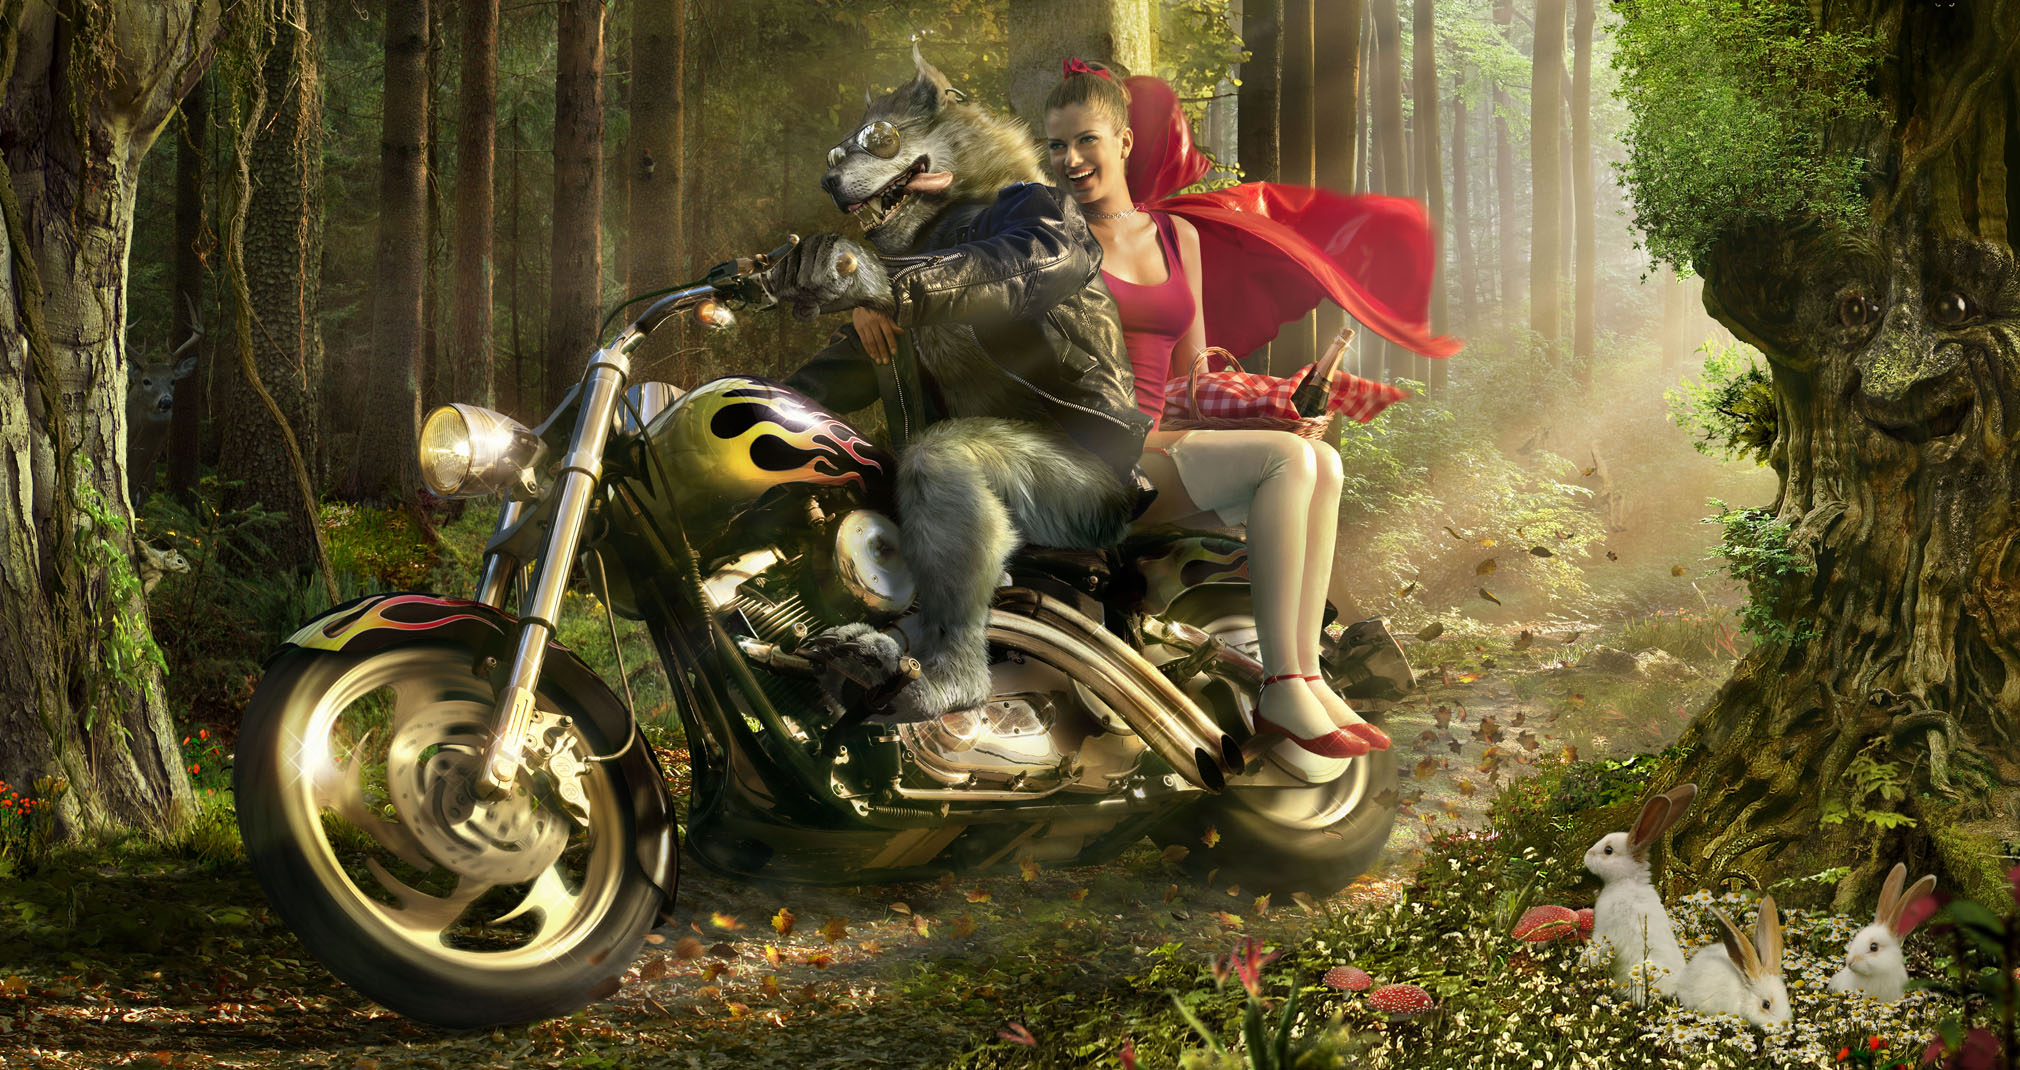 Free photo Little Red Riding Hood and the wolf are riding a motorcycle.